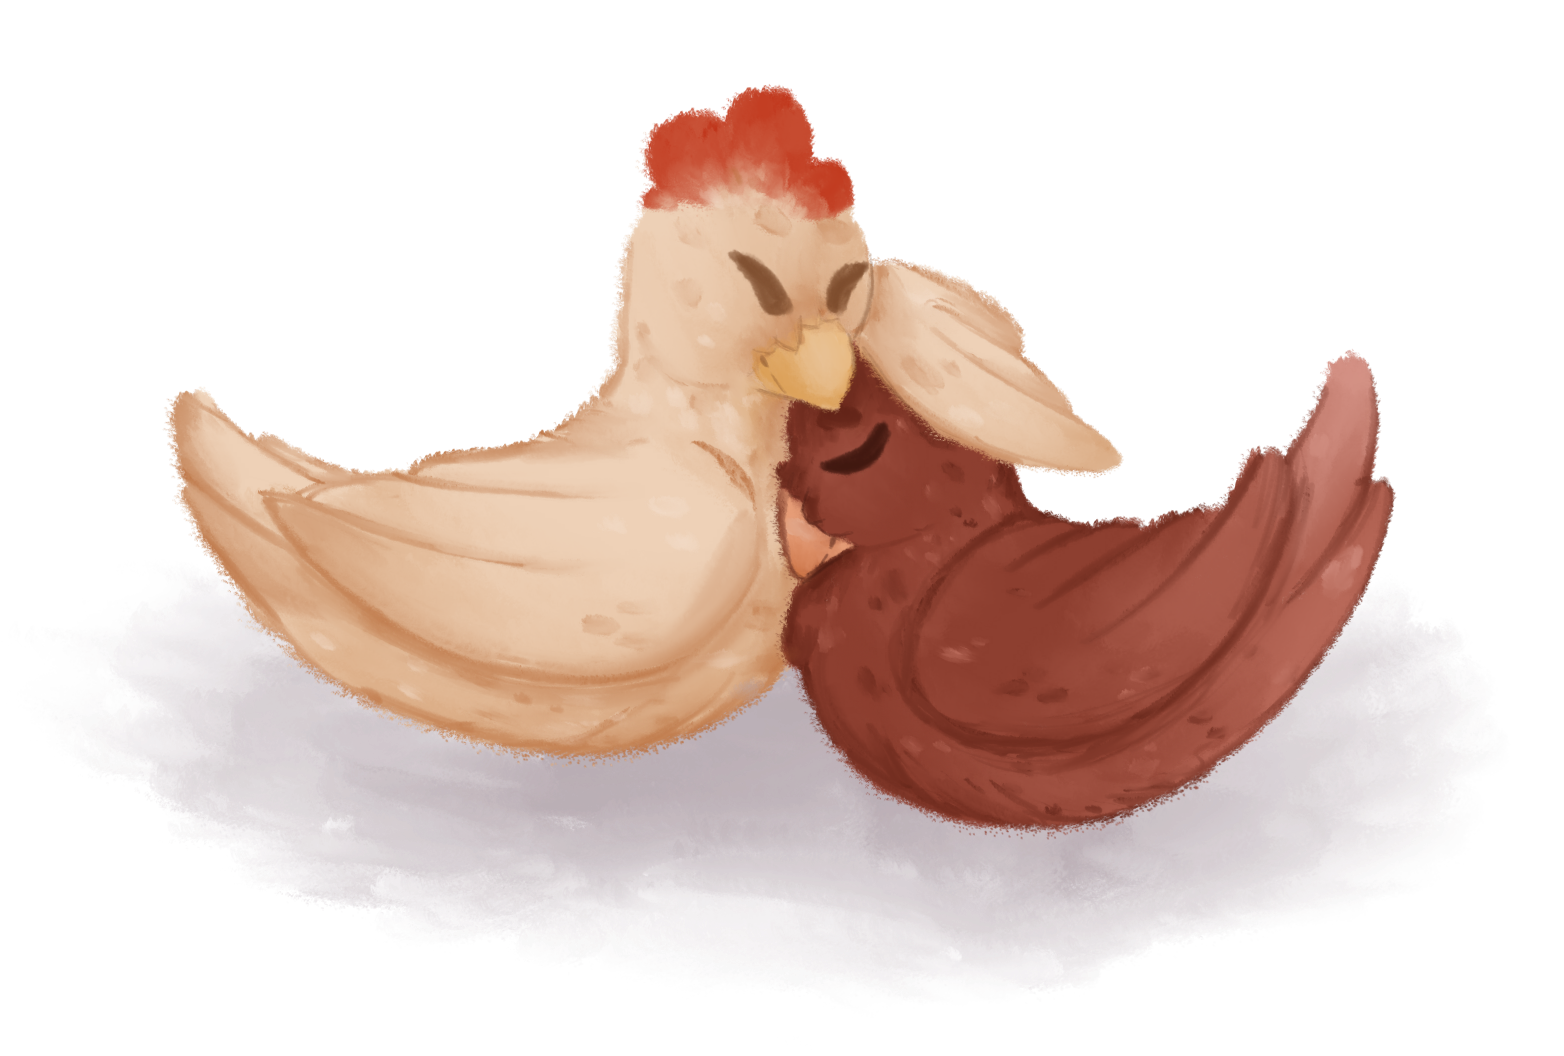 lesbian_chickens_by_cupofchamomile-dccjxp1.png